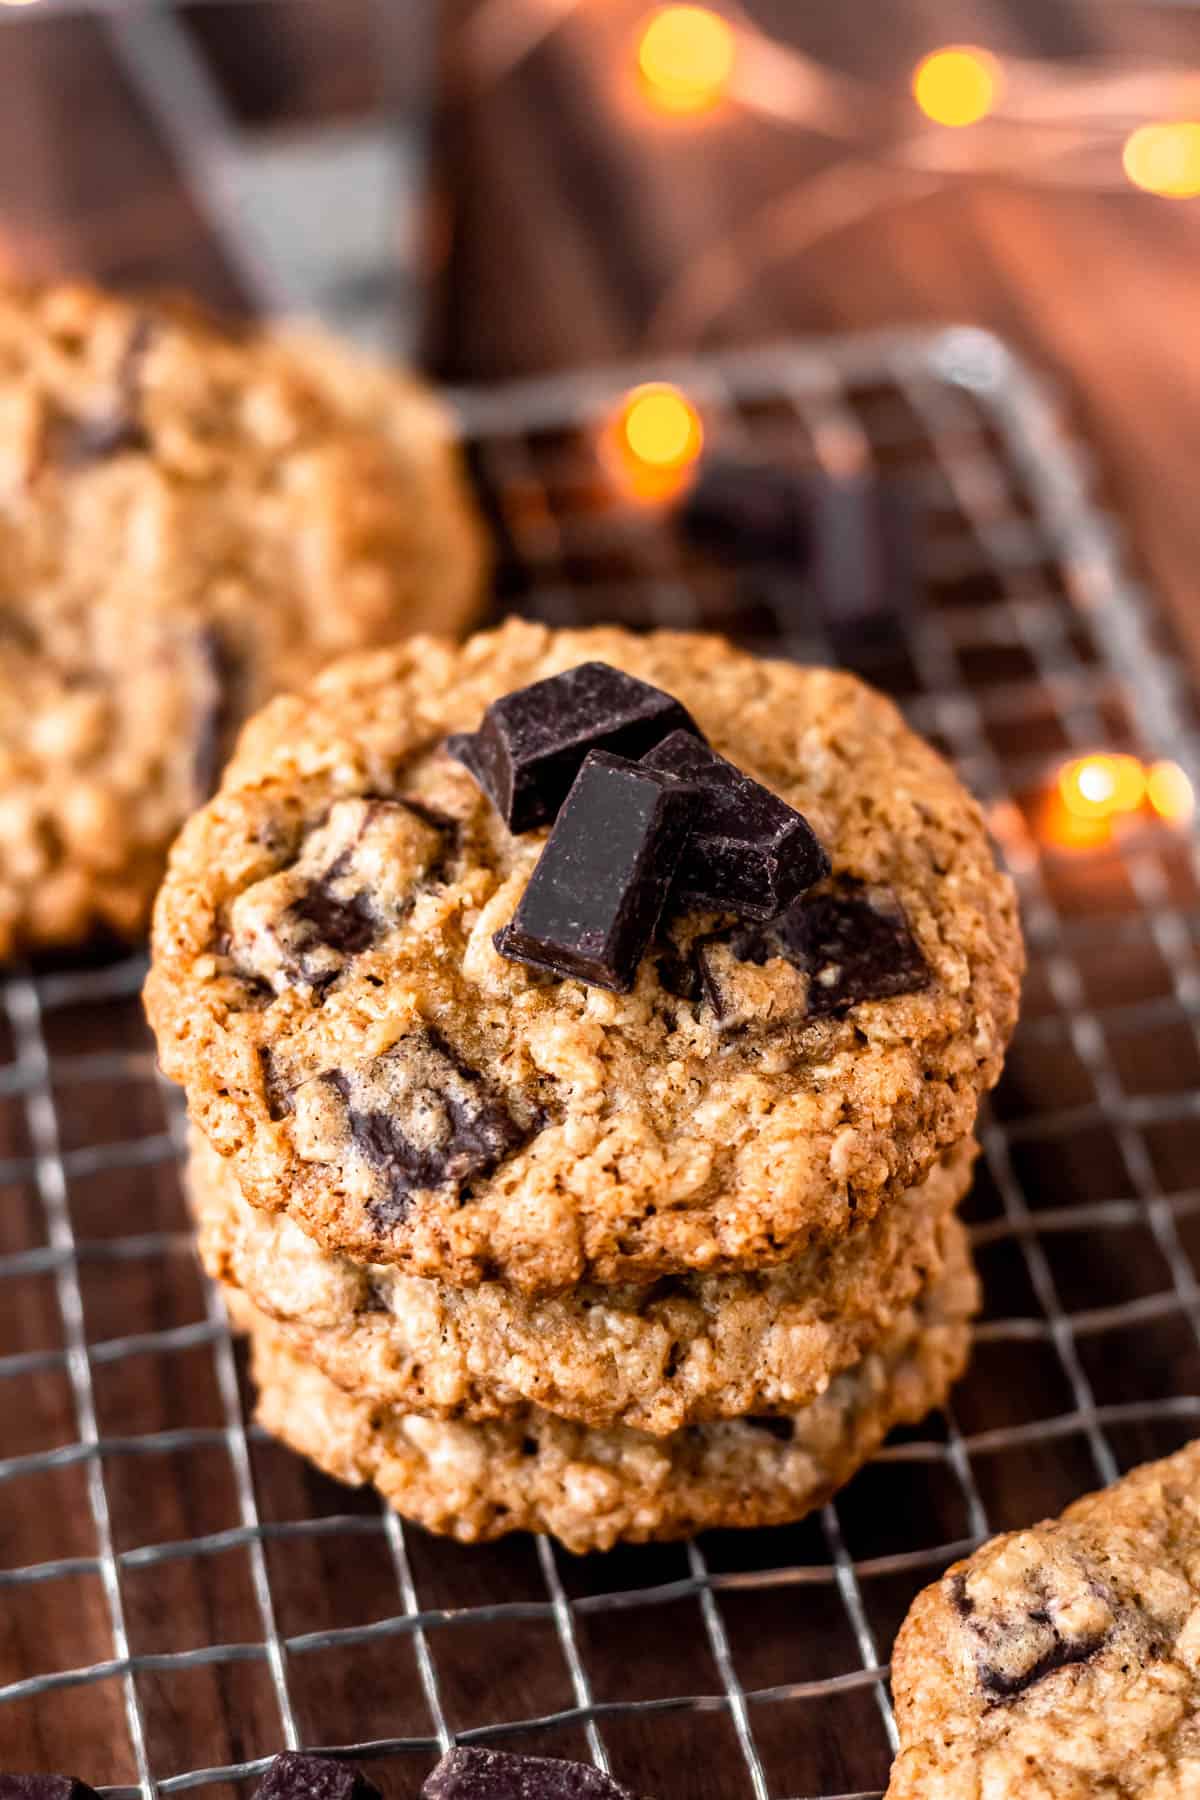 A stack of Oatmeal Chocolate Chunk Cookies with chocolate chunks on top over a cooking rack and wood table with lights in the background.